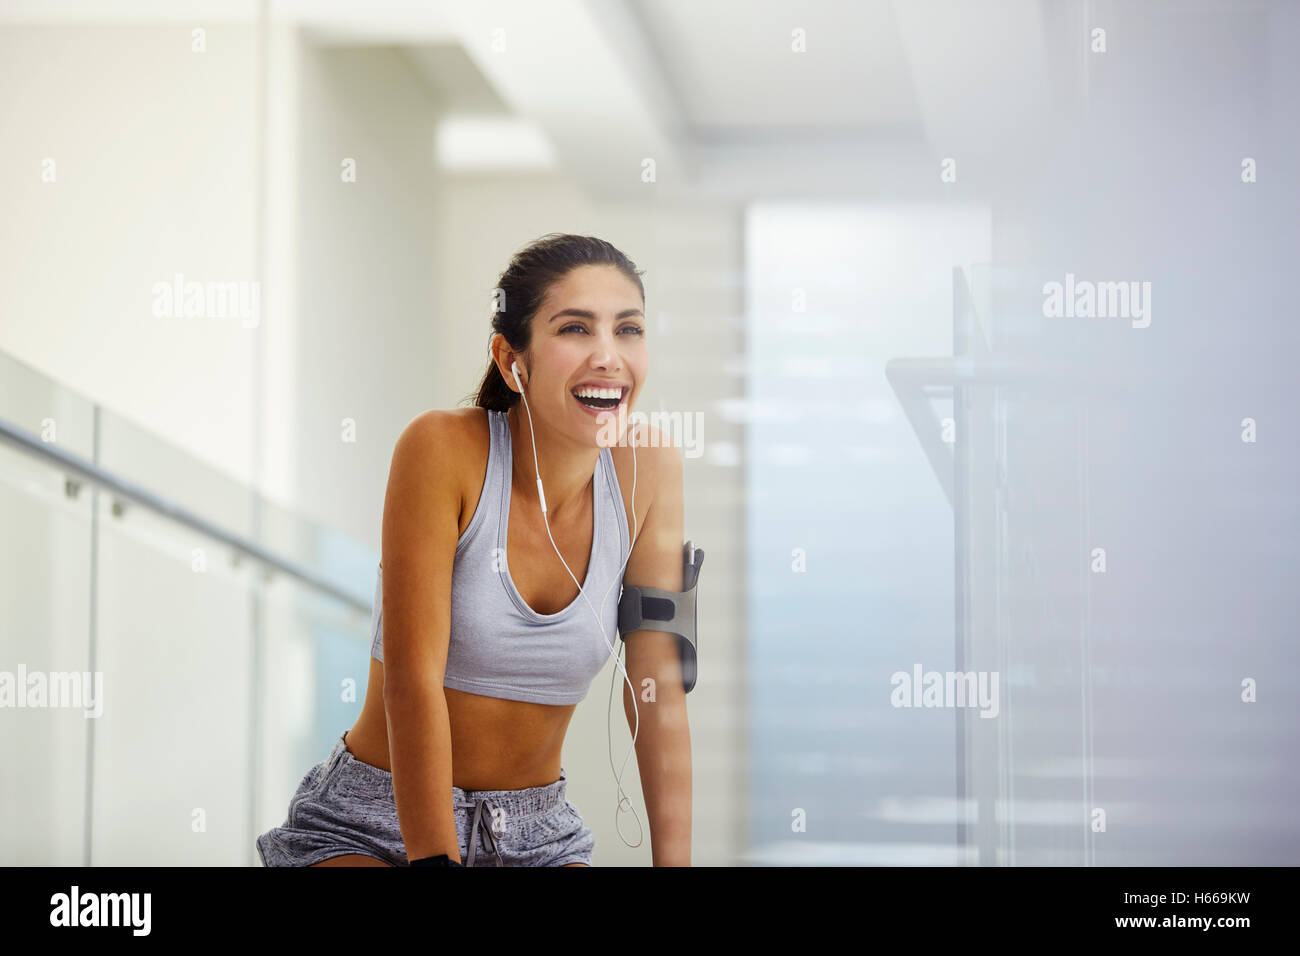 Enthusiastic woman with armband listening to music with headphones post workout Stock Photo